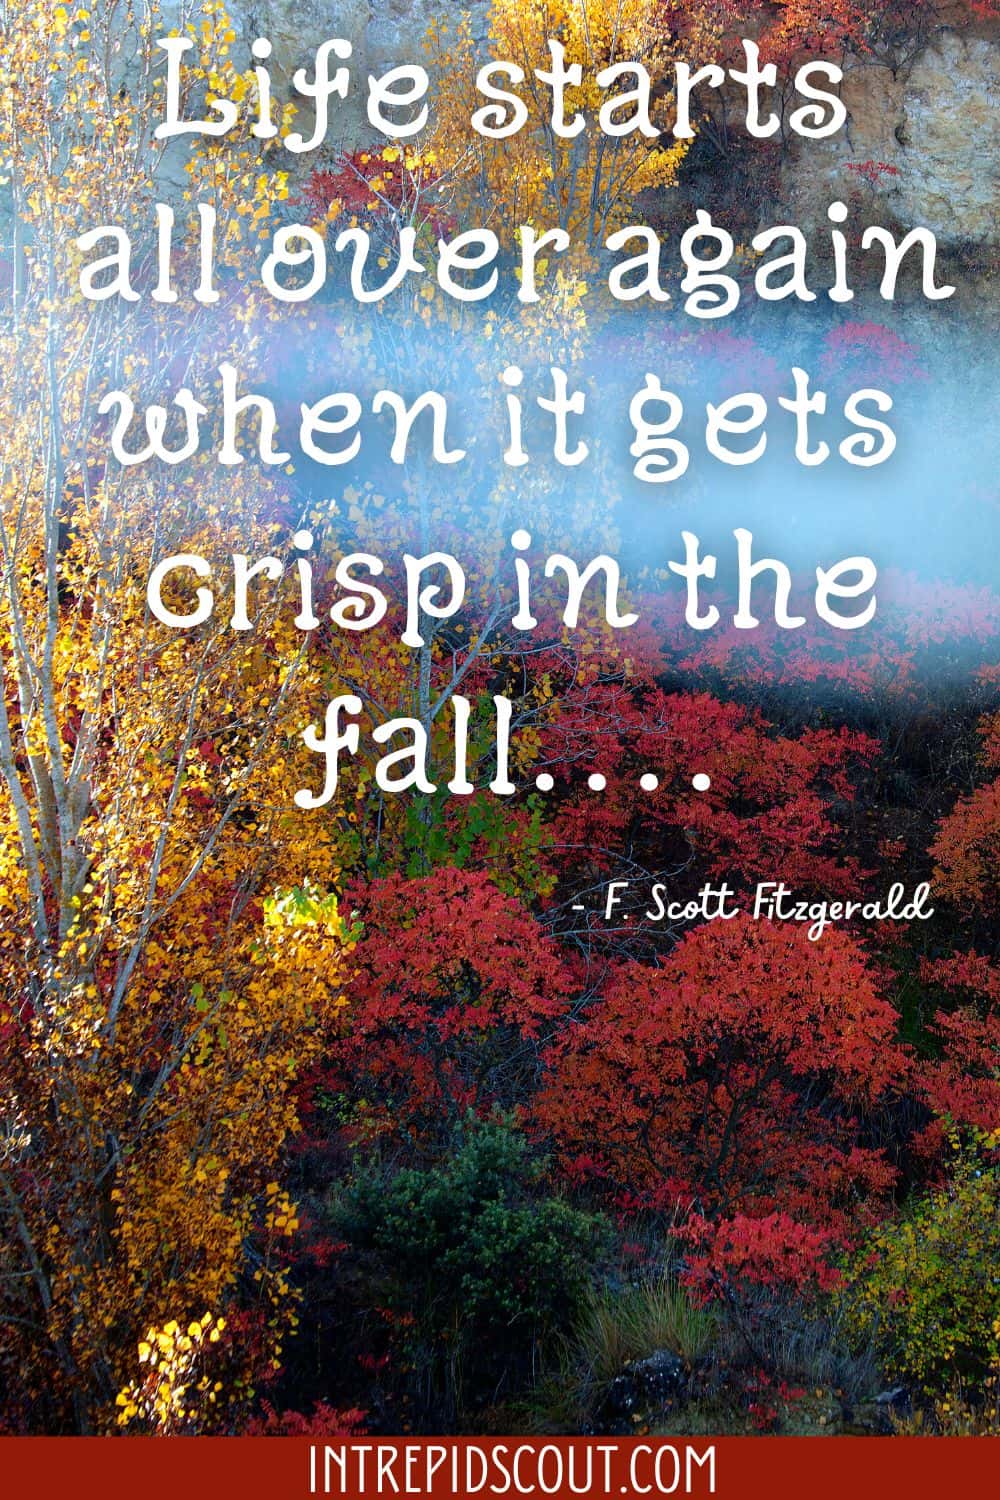 Autumn Captions and Quotes